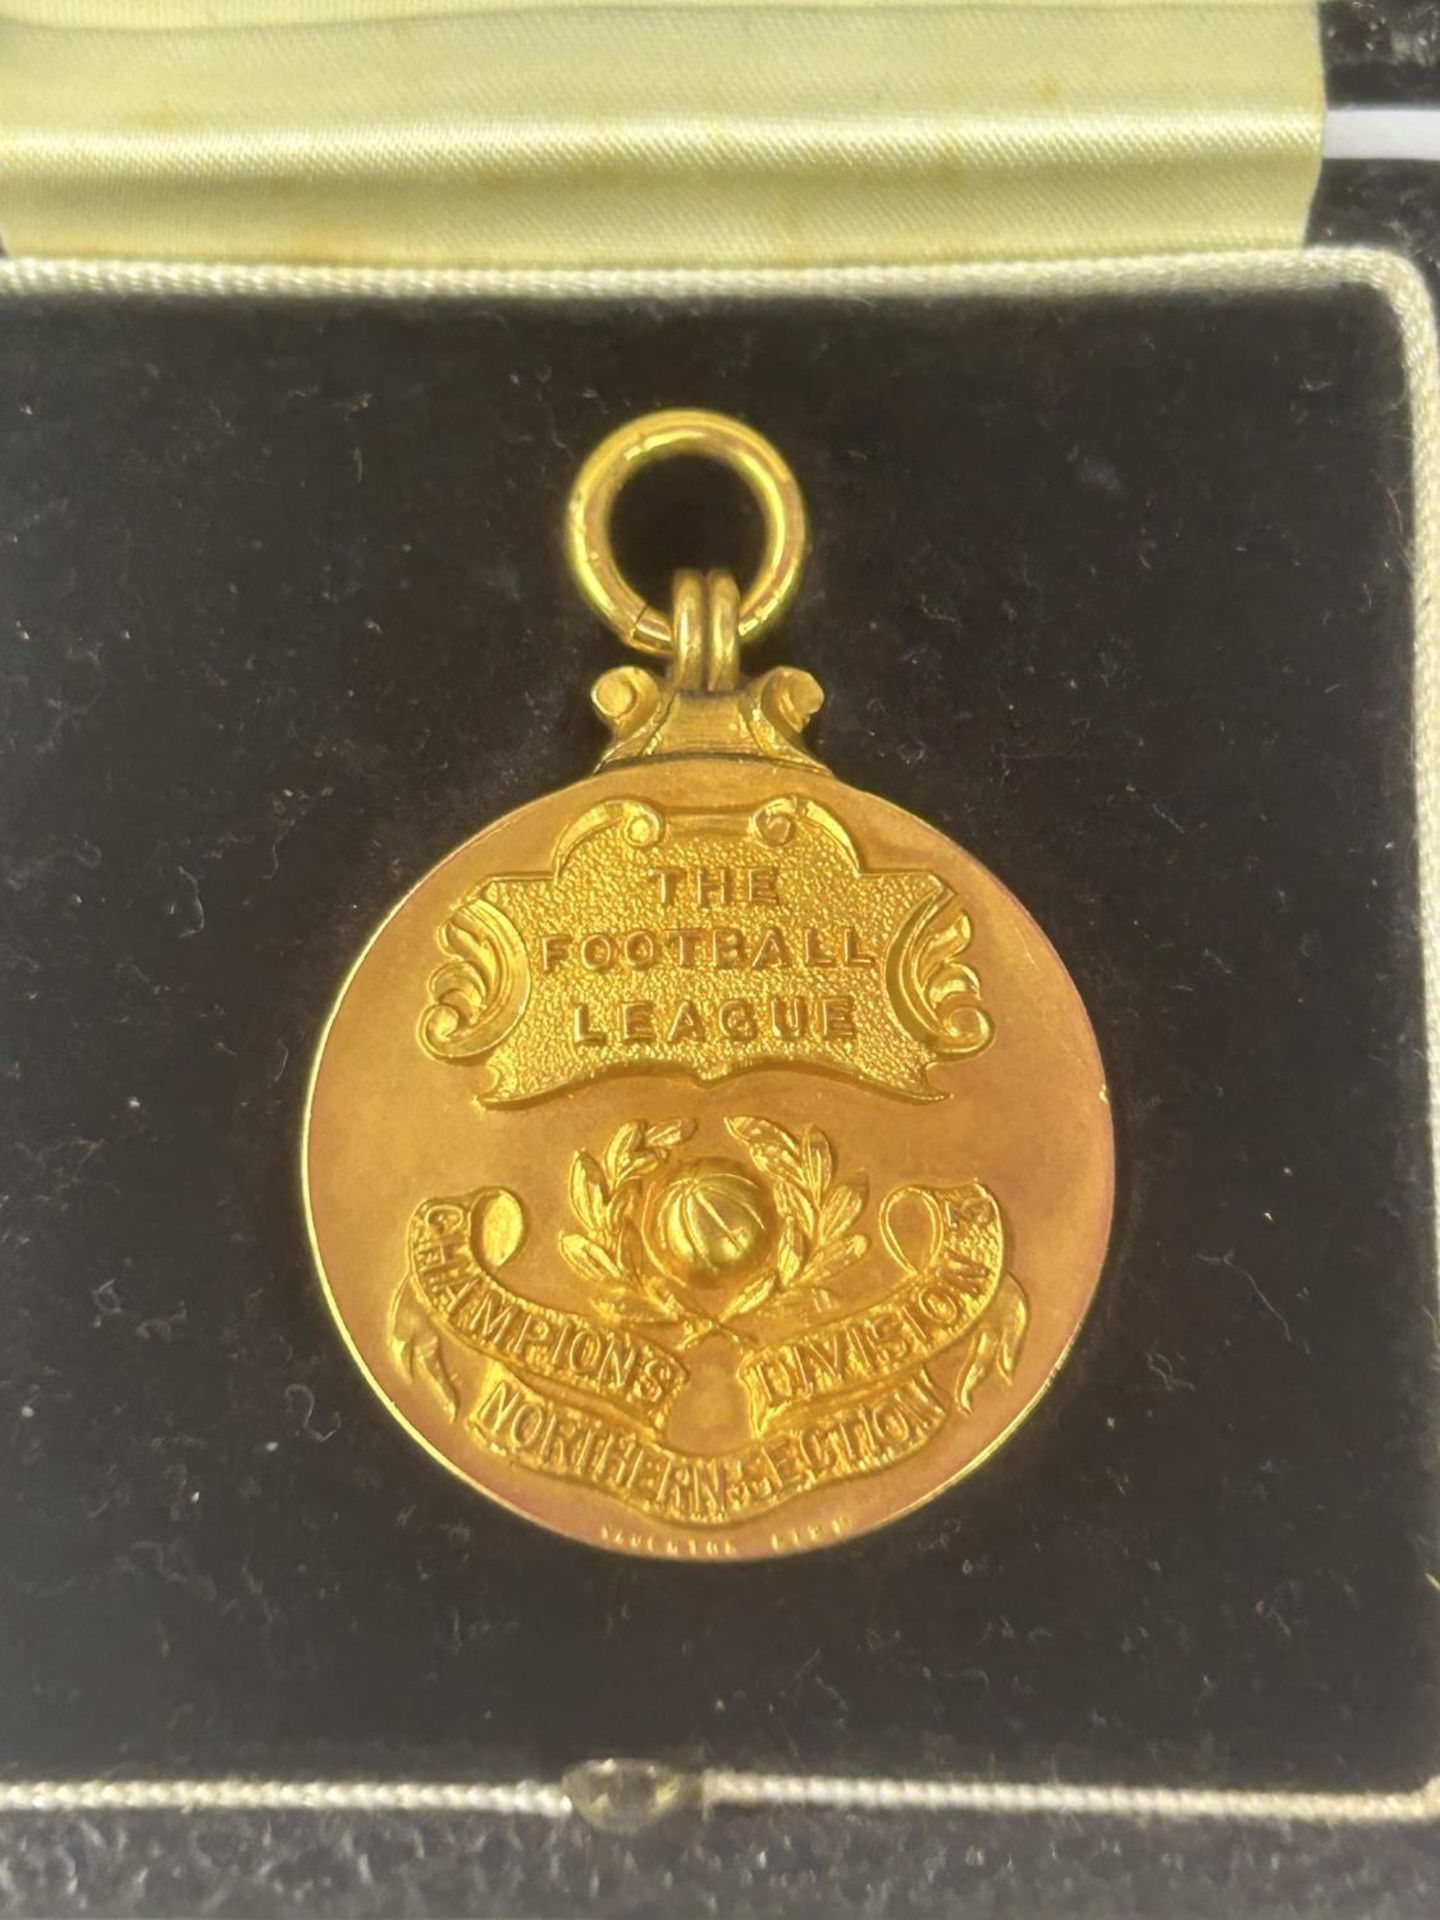 A HALLMARKED 9 CARAT GOLD FOOTBALL LEAGUE DIVISION 3 NORTHERN SECTION LEAGUE WINNERS MEDAL 1953-1954 - Image 2 of 5